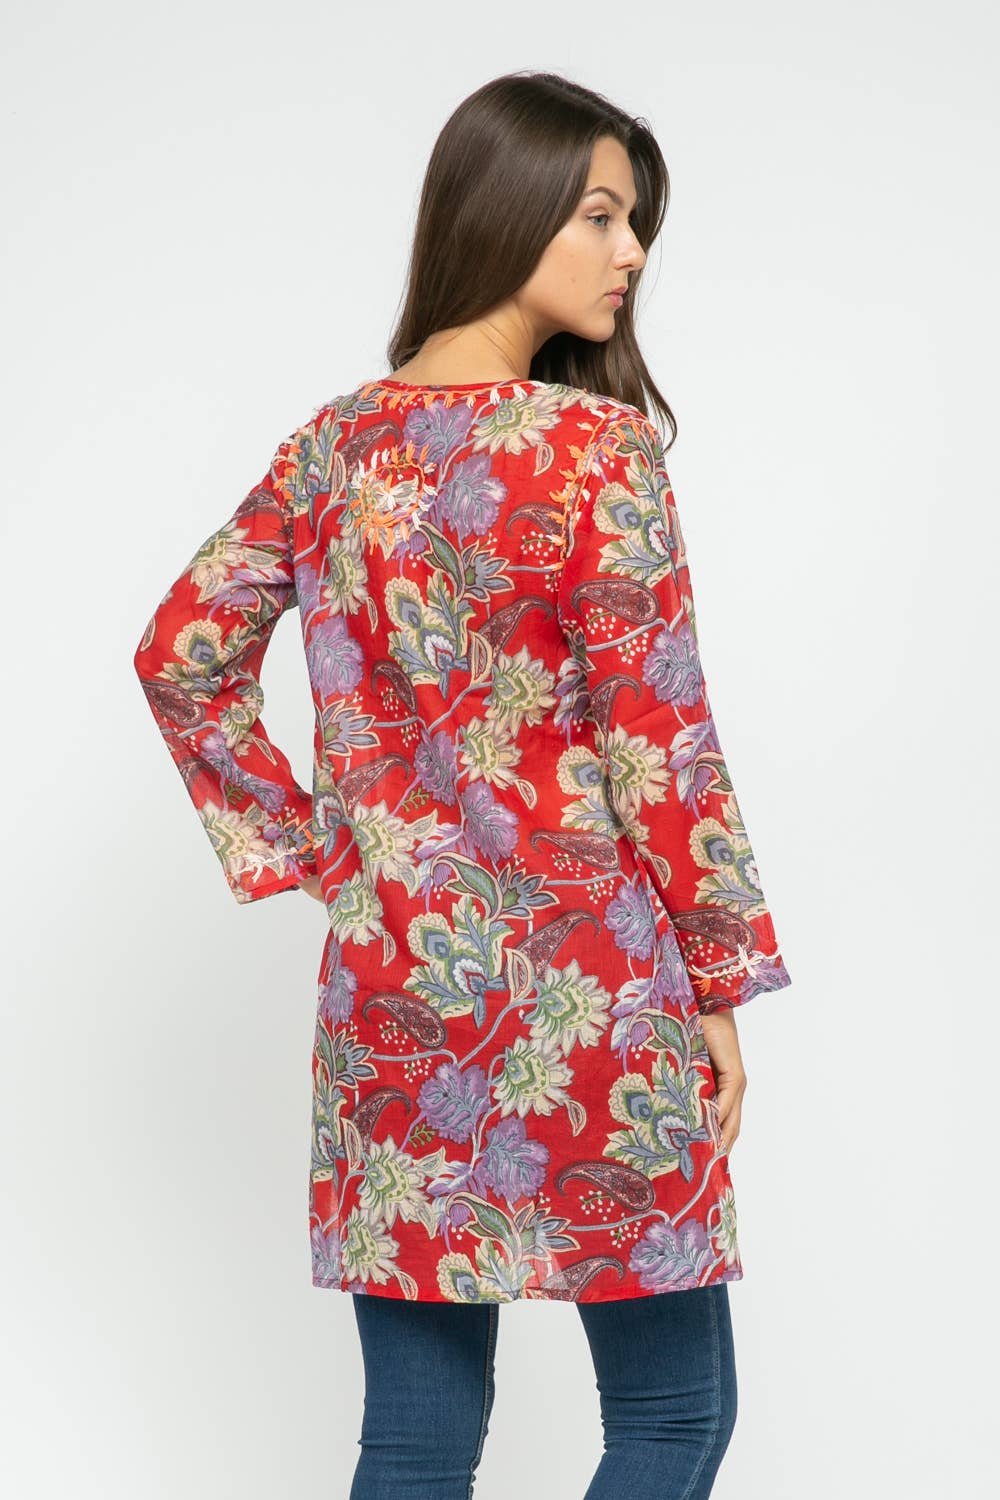 Tunic: Carlyle Red Printed Embroidered